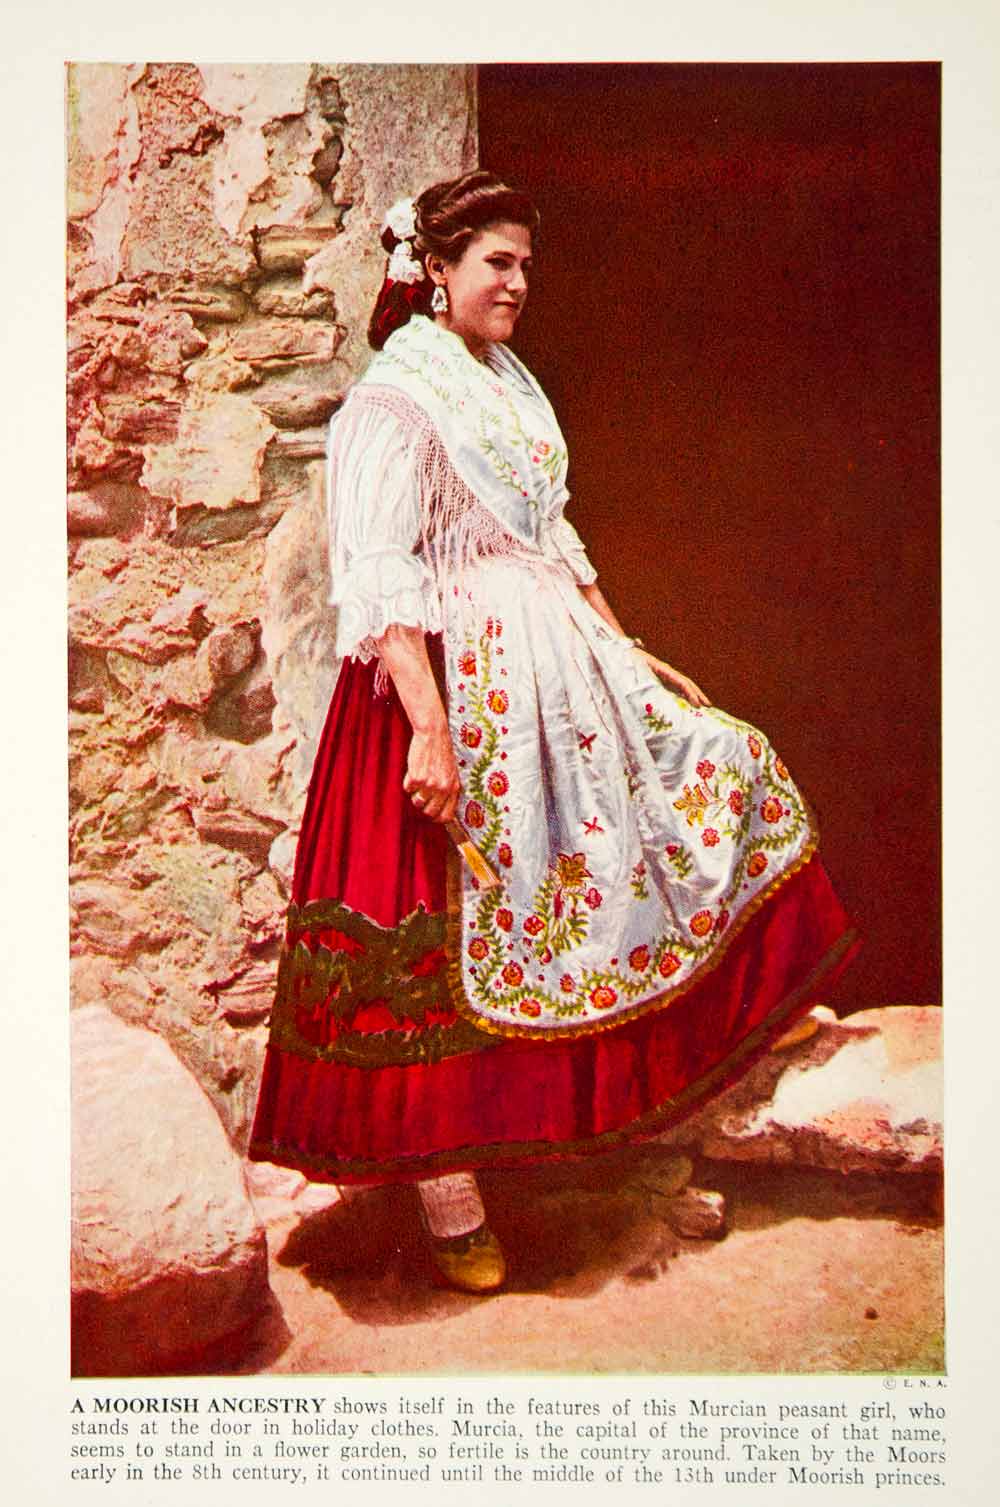 traditional dresses of different countries with names